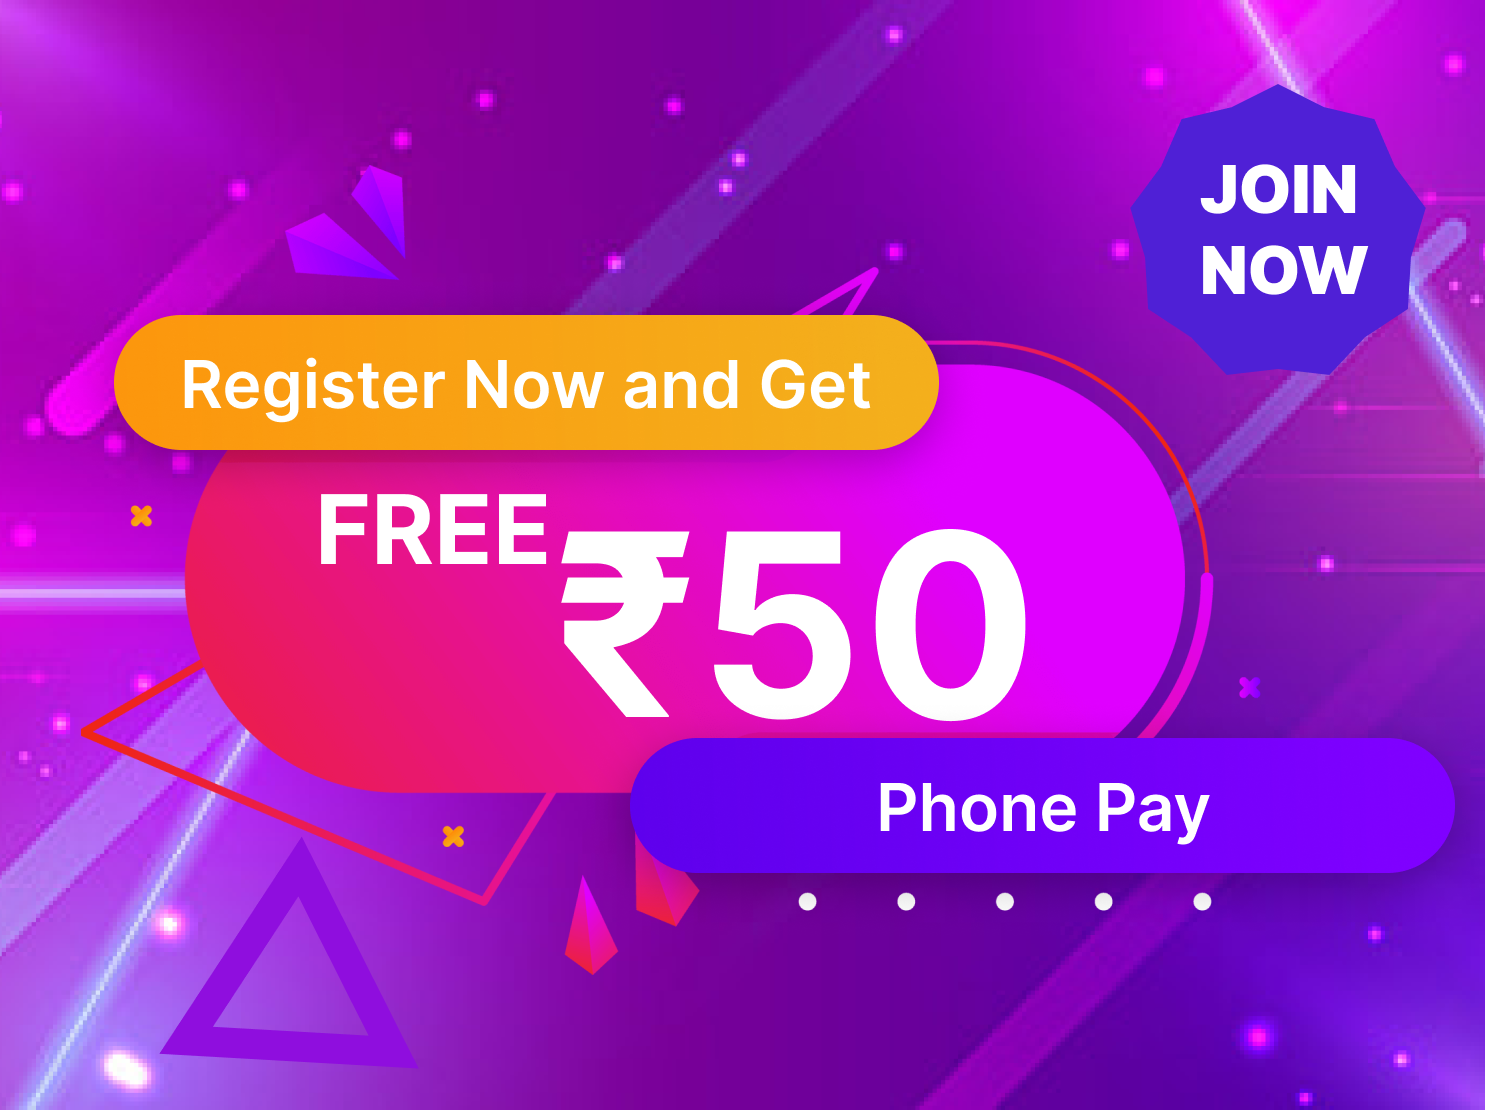 Rs 30 Free Recharge on Registration